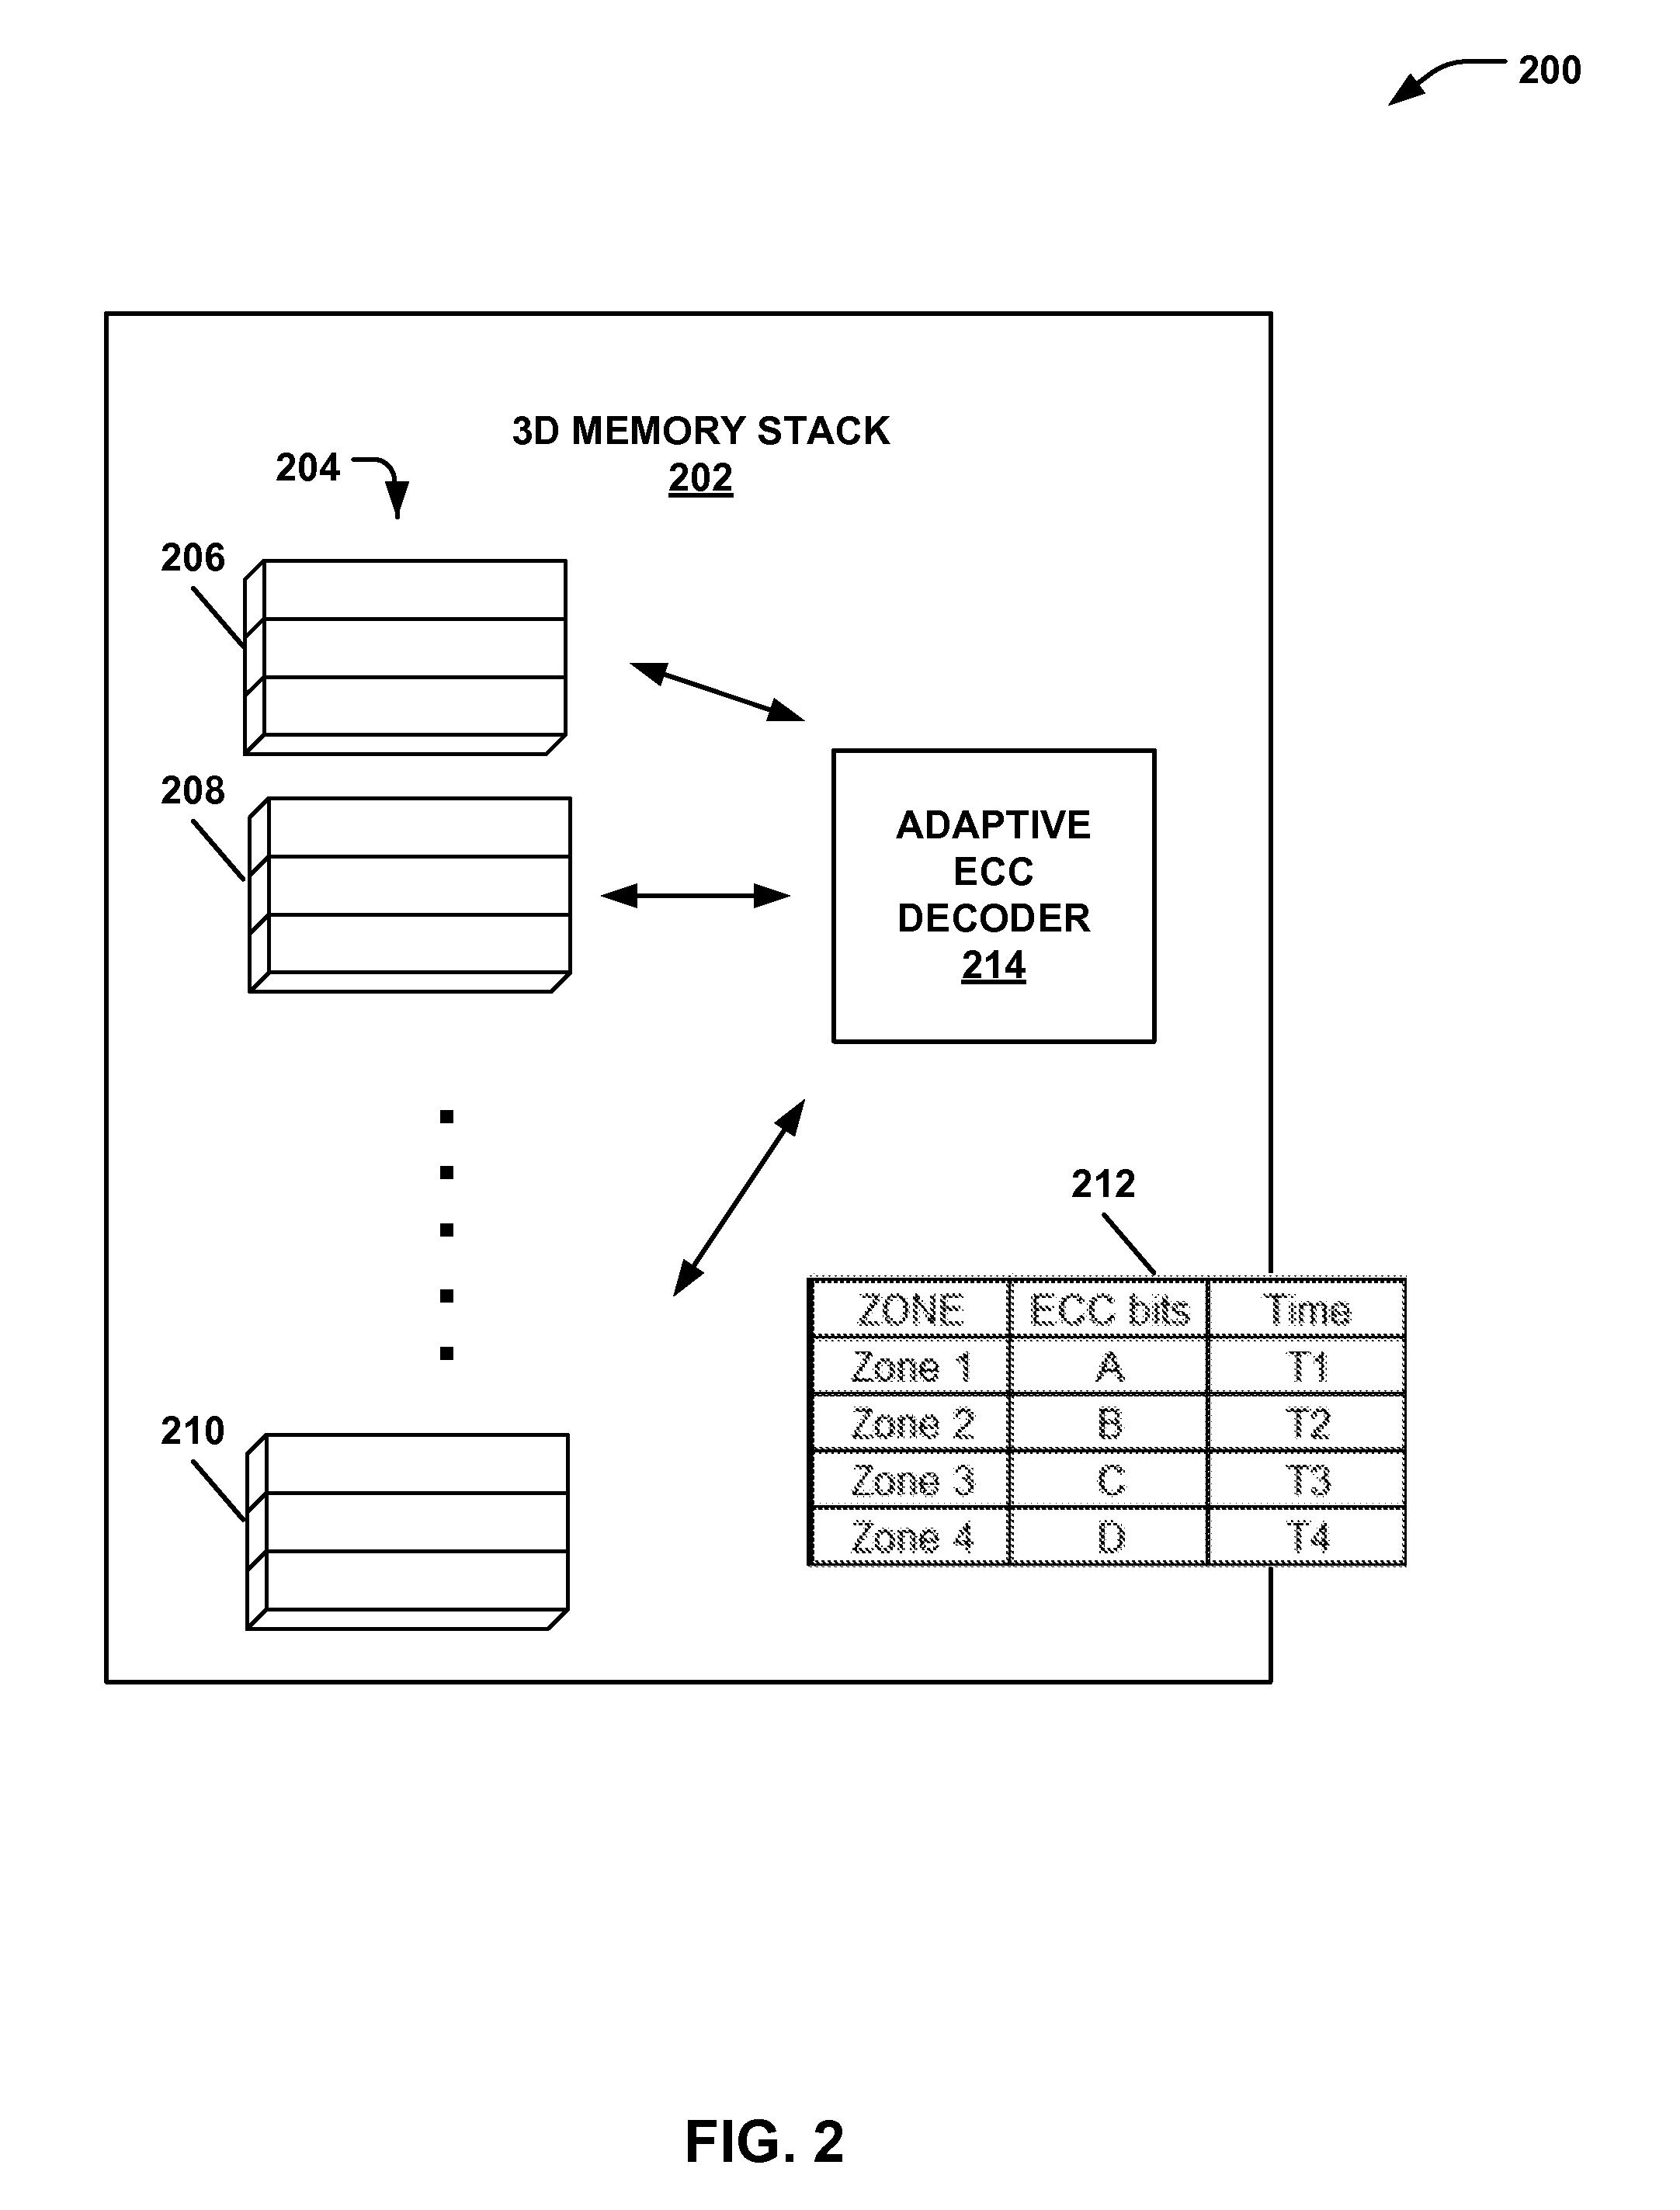 Error correction based on thermal profile of flash memory device